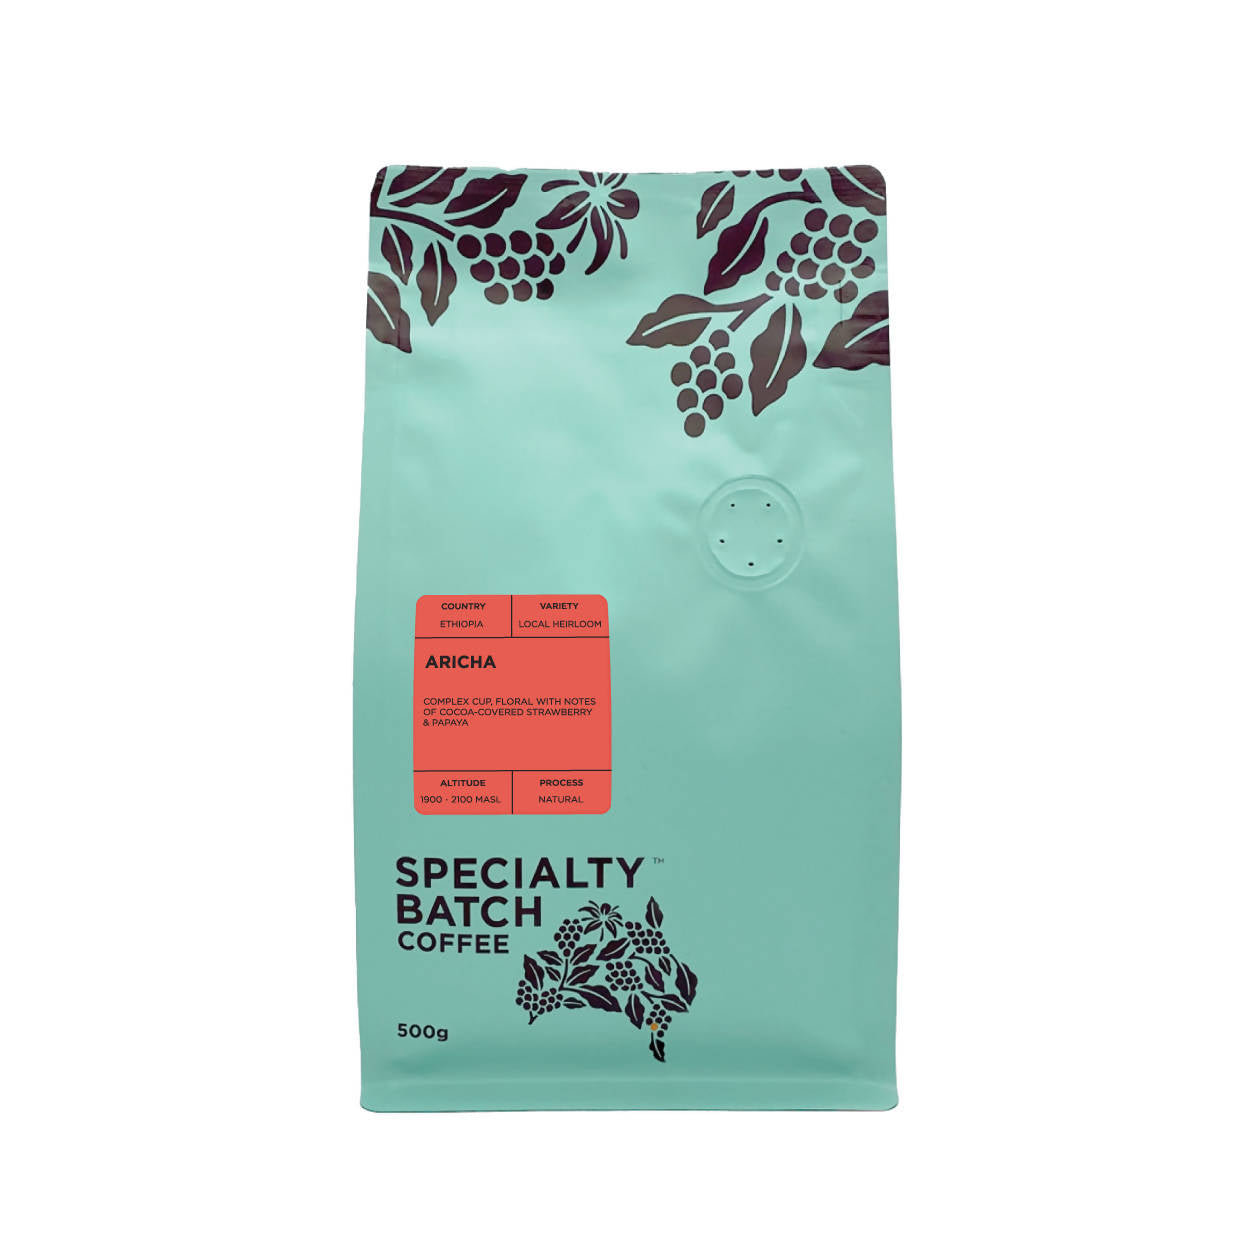 Ethiopia Aricha - Filter - BeanBurds SPECIALTY BATCH COFFEE 250g (10 - 12 cups) / Whole beans